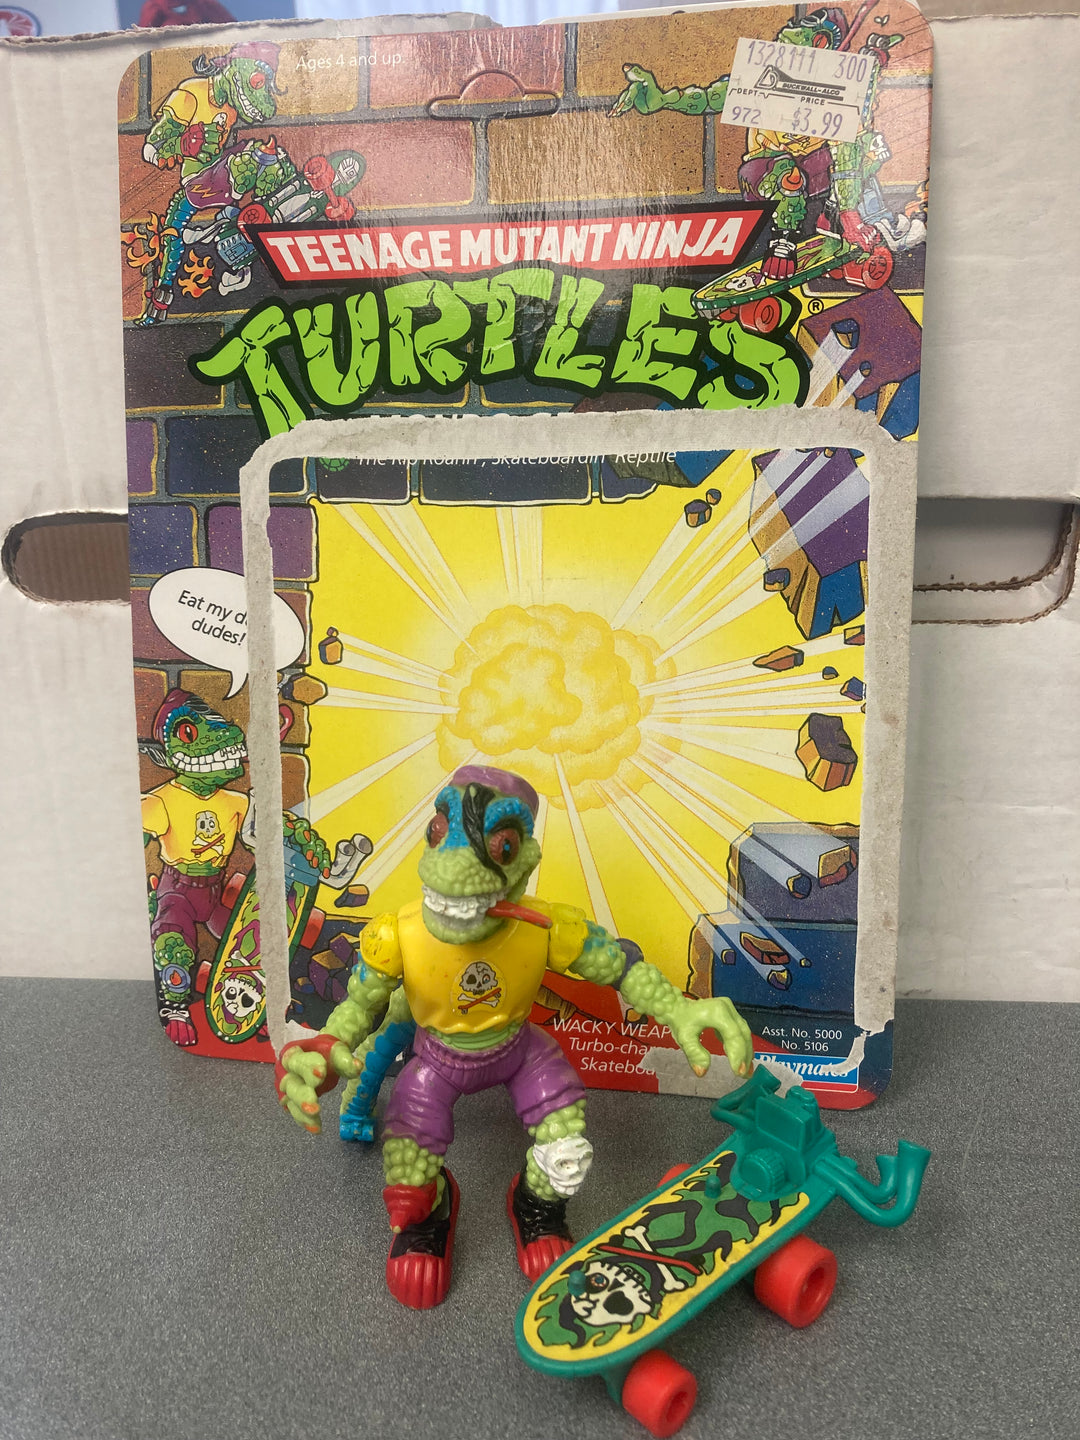 TMNT Mondo Gecko Playmates complete with card